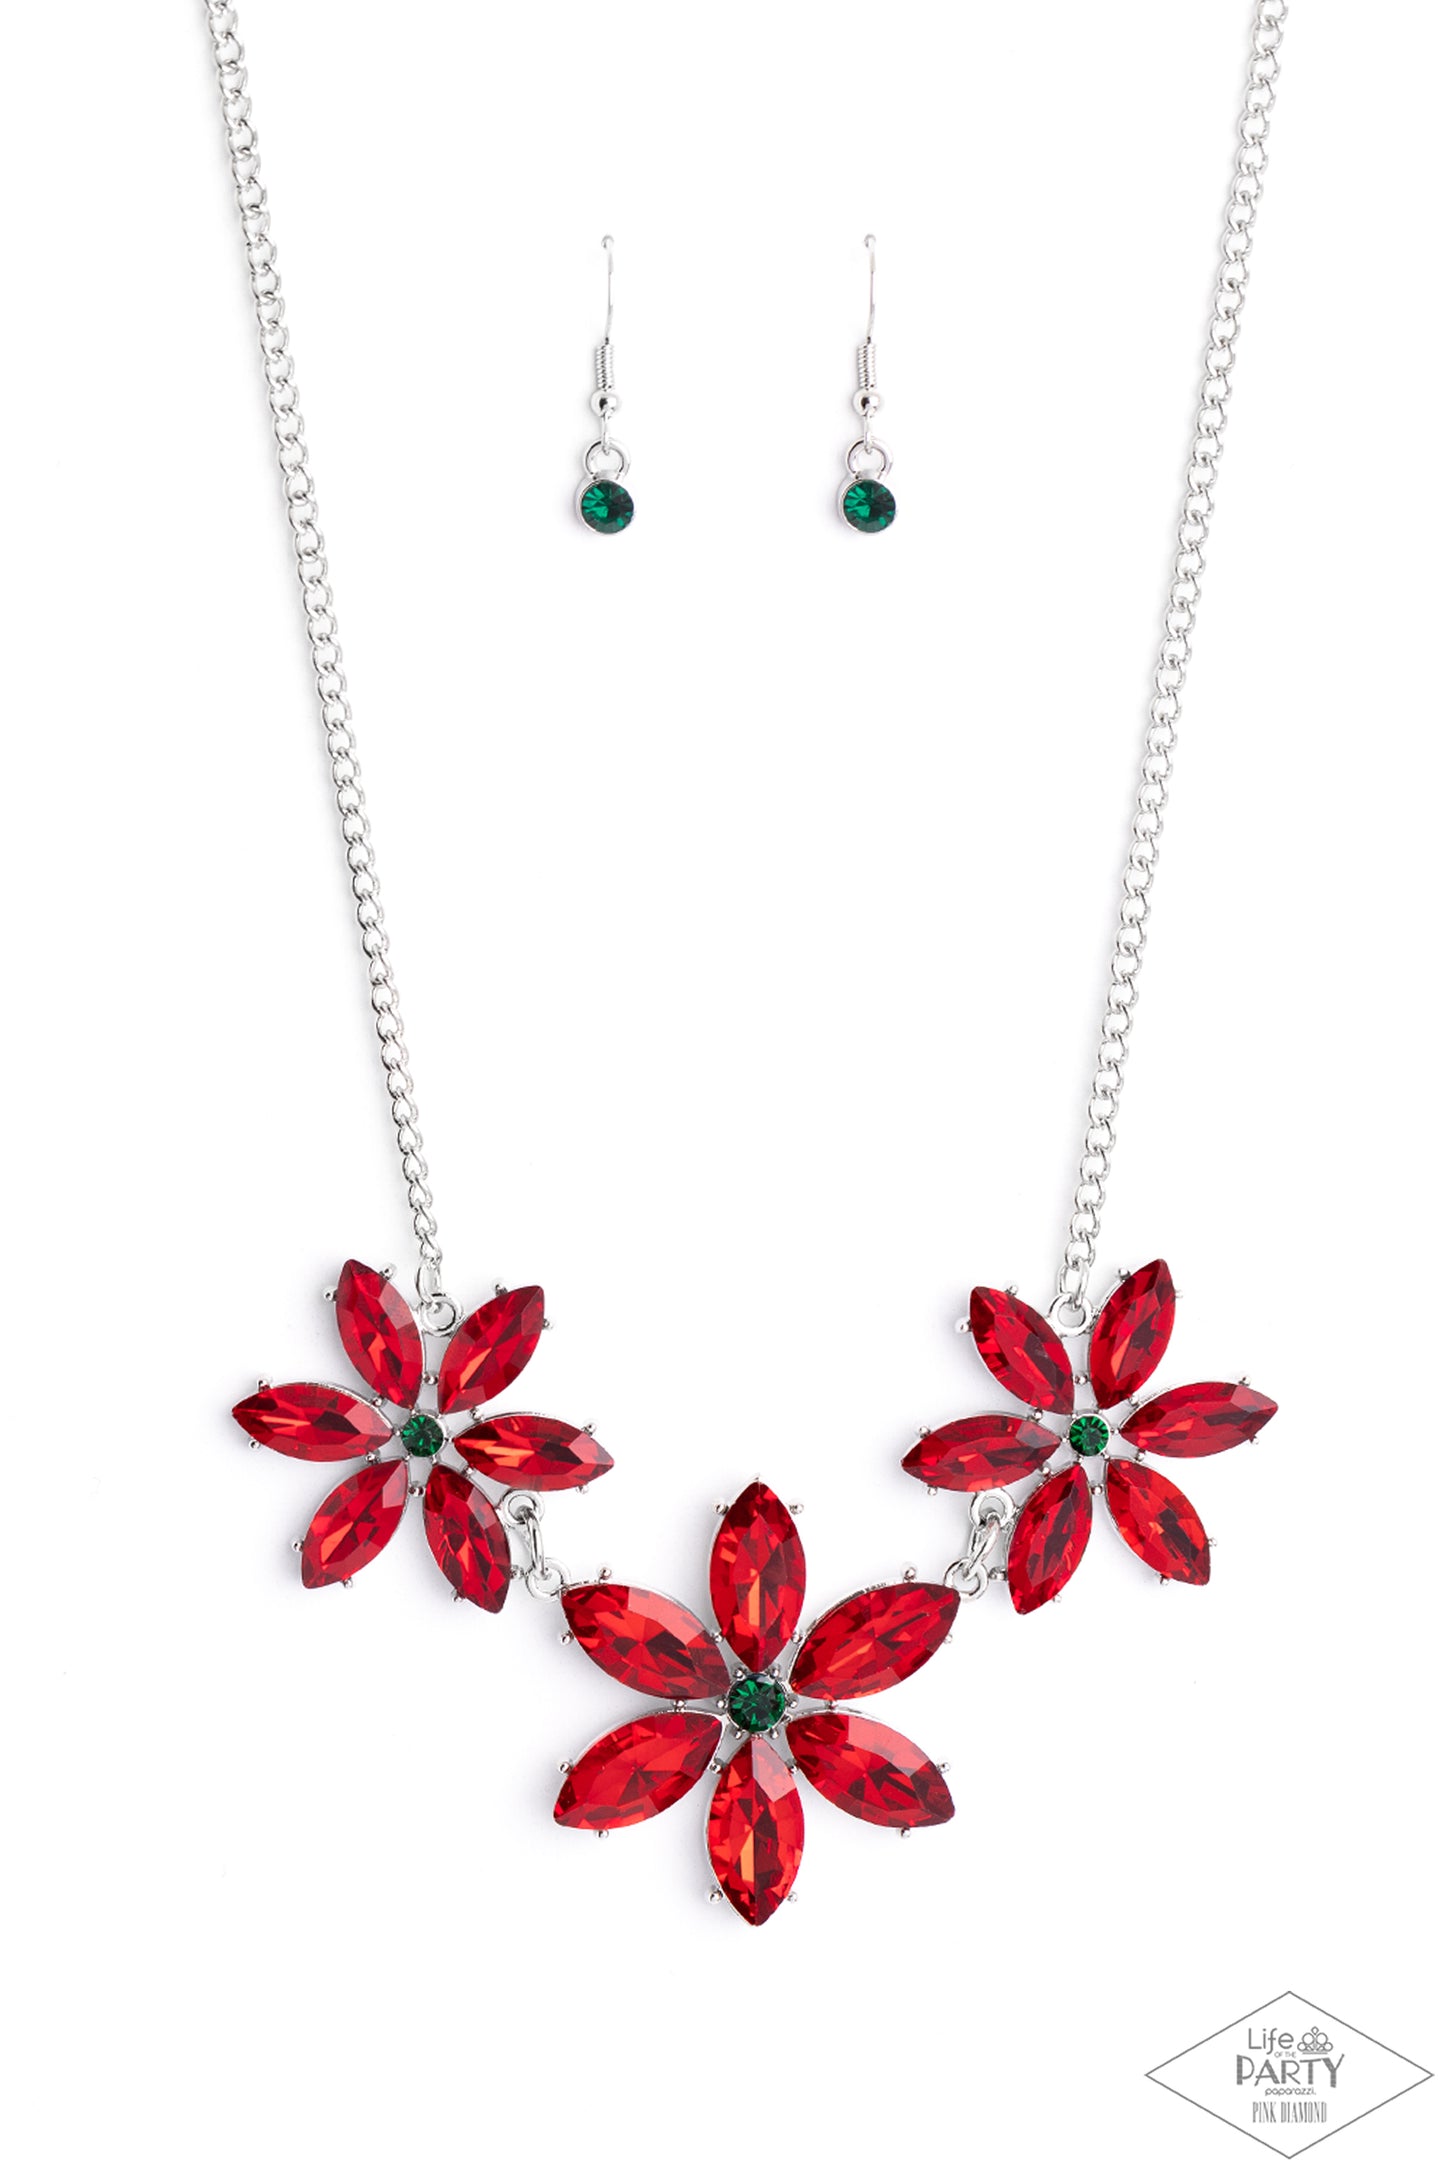 Paparazzi Accessories - Meadow Muse - Multi Necklaces Rich red marquise cut rhinestones gather into whimsical flowers dotted with brilliant emerald rhinestone centers. The sparkling red gems are set in pronged settings and connect to a dainty silver chain creating a fanciful display across the collar. Features an adjustable clasp closure. Sold as one individual necklace. Includes one pair of matching earrings.